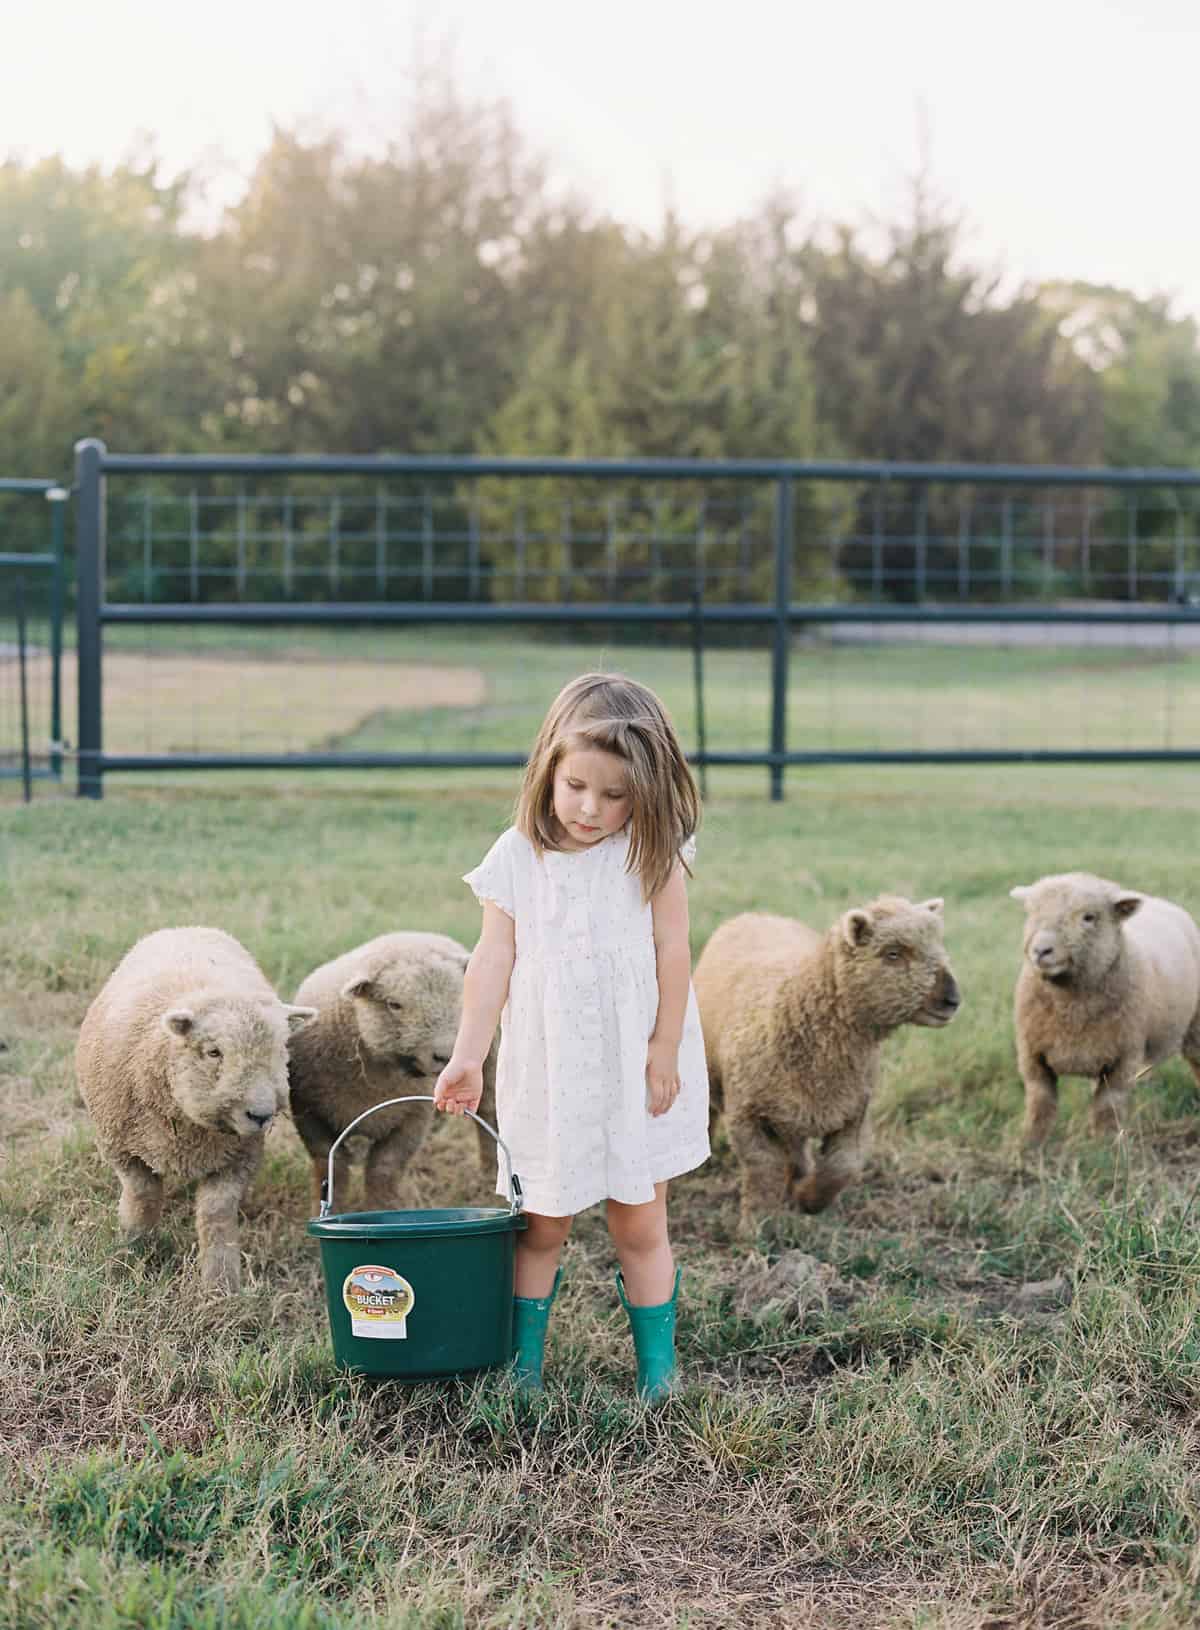 Babydoll Sheep Size | Babydolls usually do not reach taller than 24" | Learn more at everlyraine.com | Everly & Raine Co. by Katie O. Selvidge